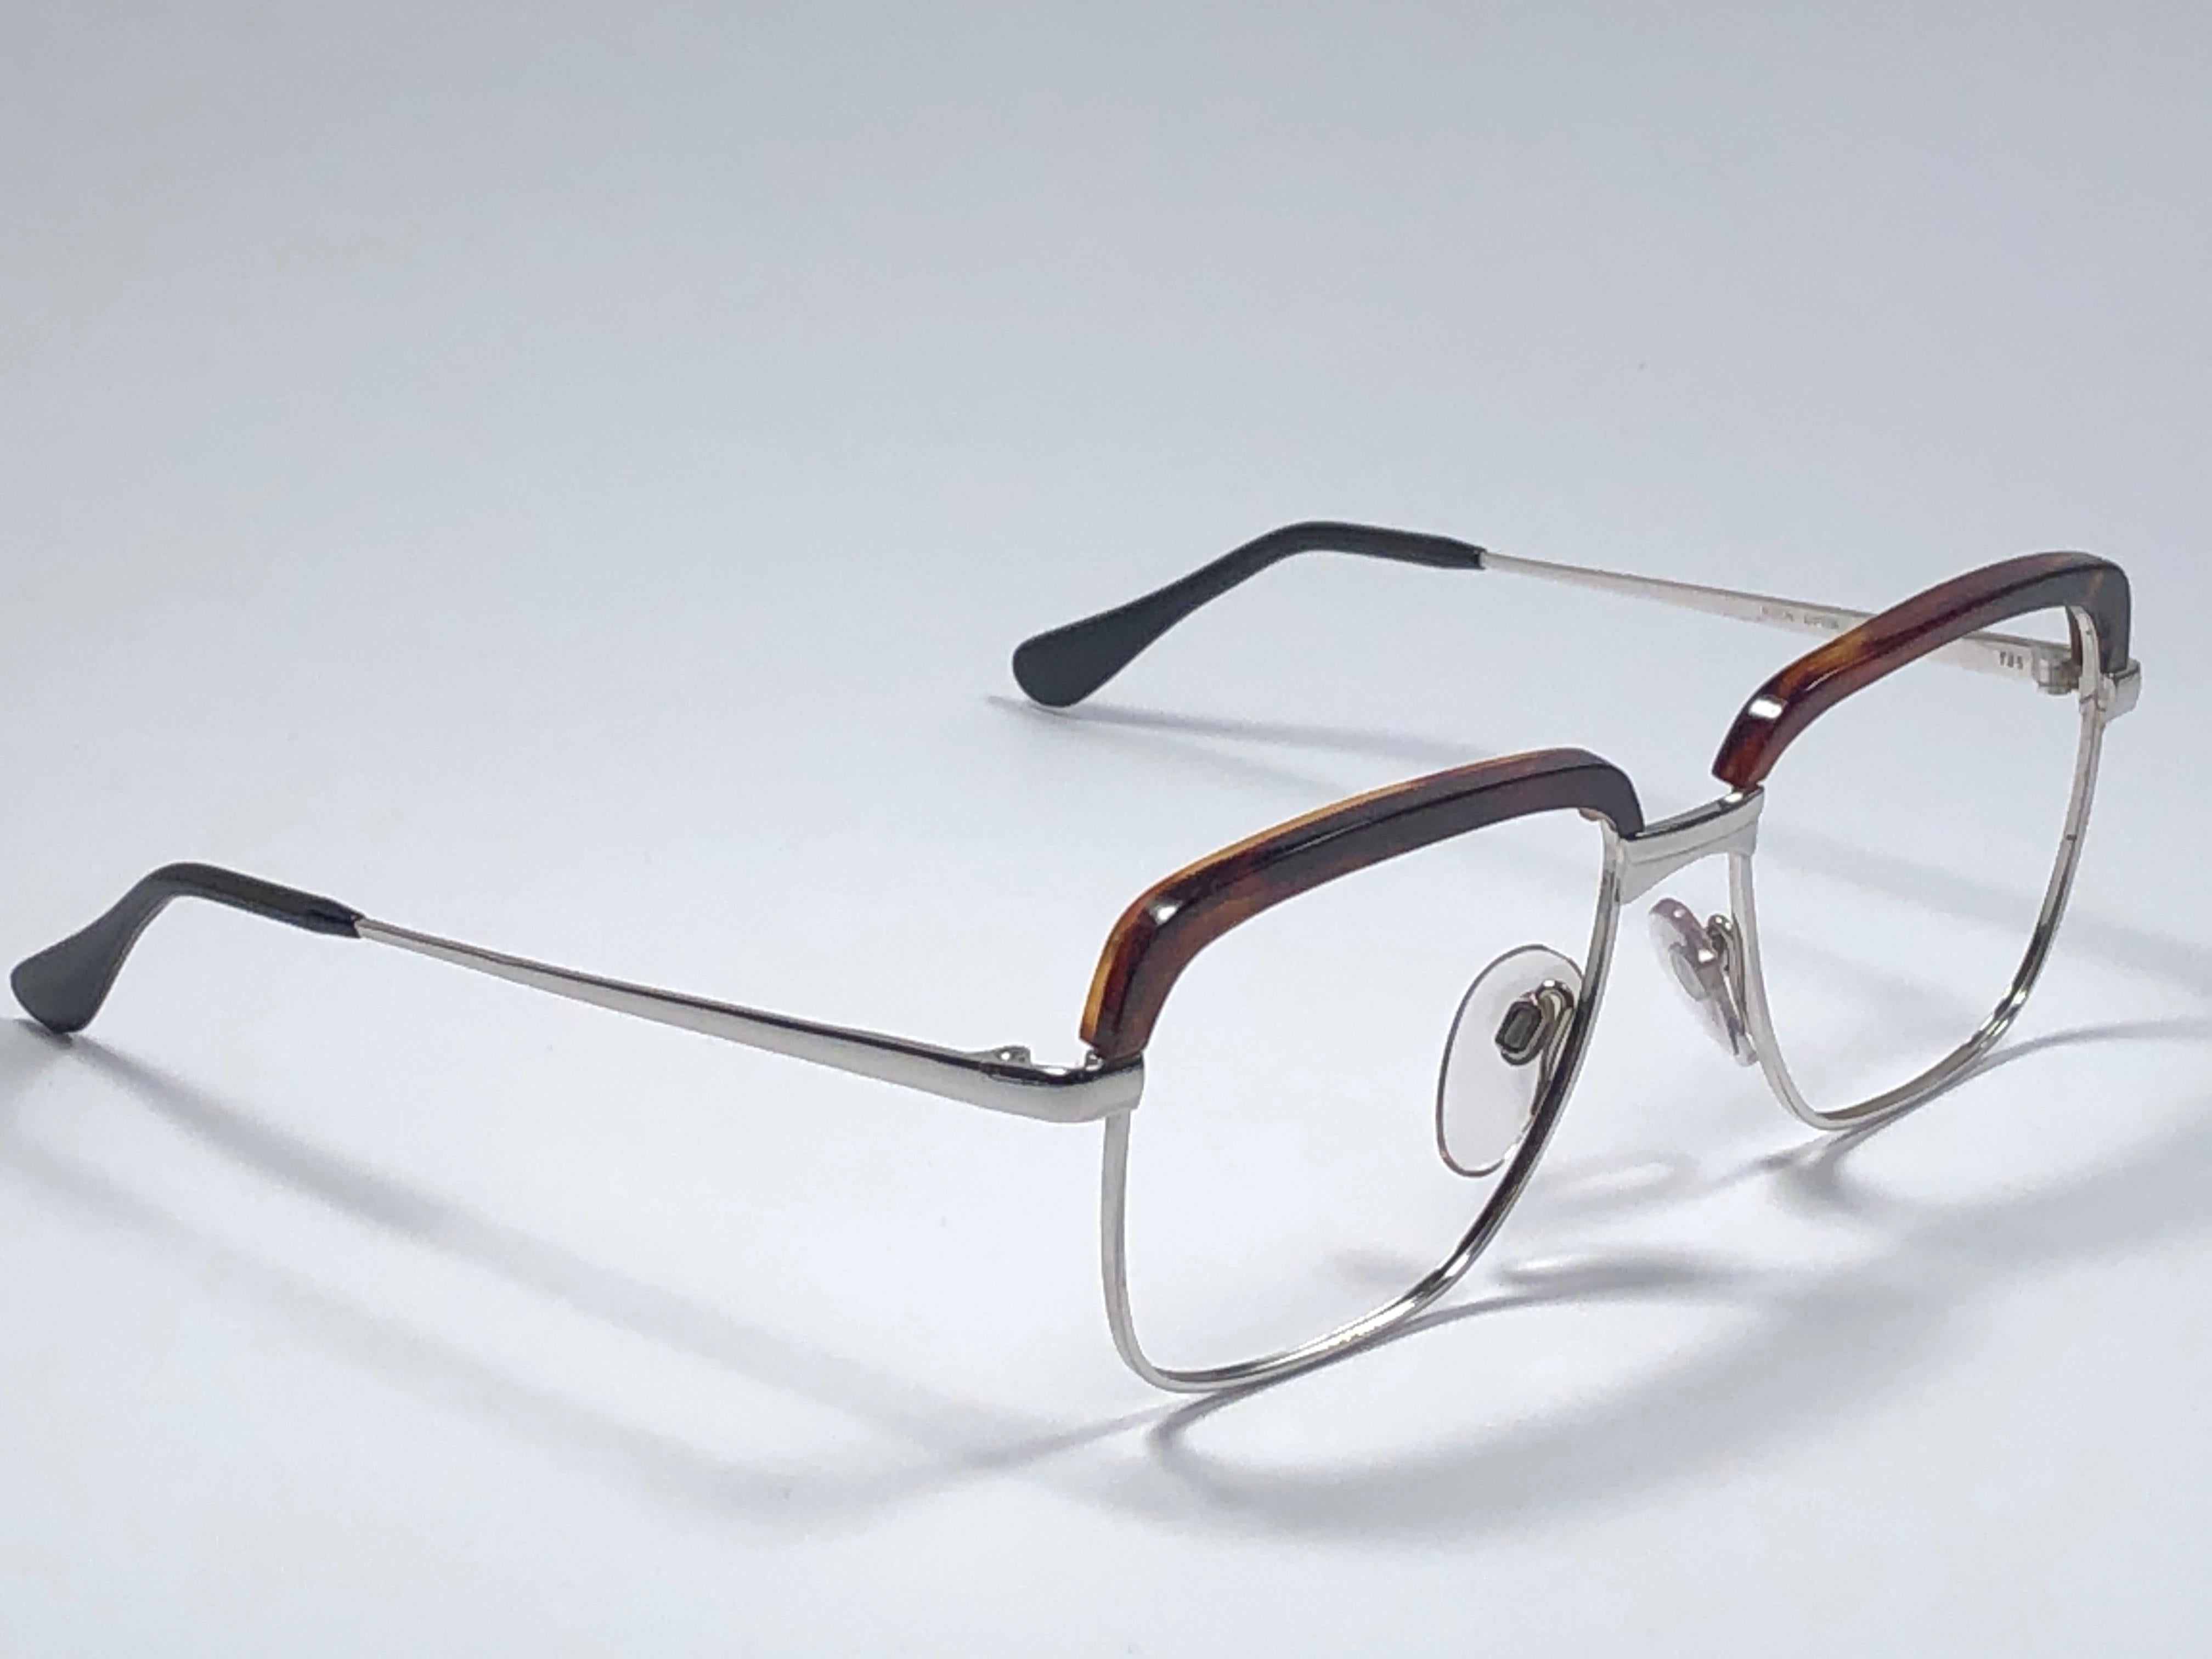 New, rare Köln Optik genuine tortoise shell and silver combination frame. 

Suitable for RX, prescription glasses use. 

Please notice that this item is nearly 40 years old and could show some storage wear. 

New, ever worn or displayed.